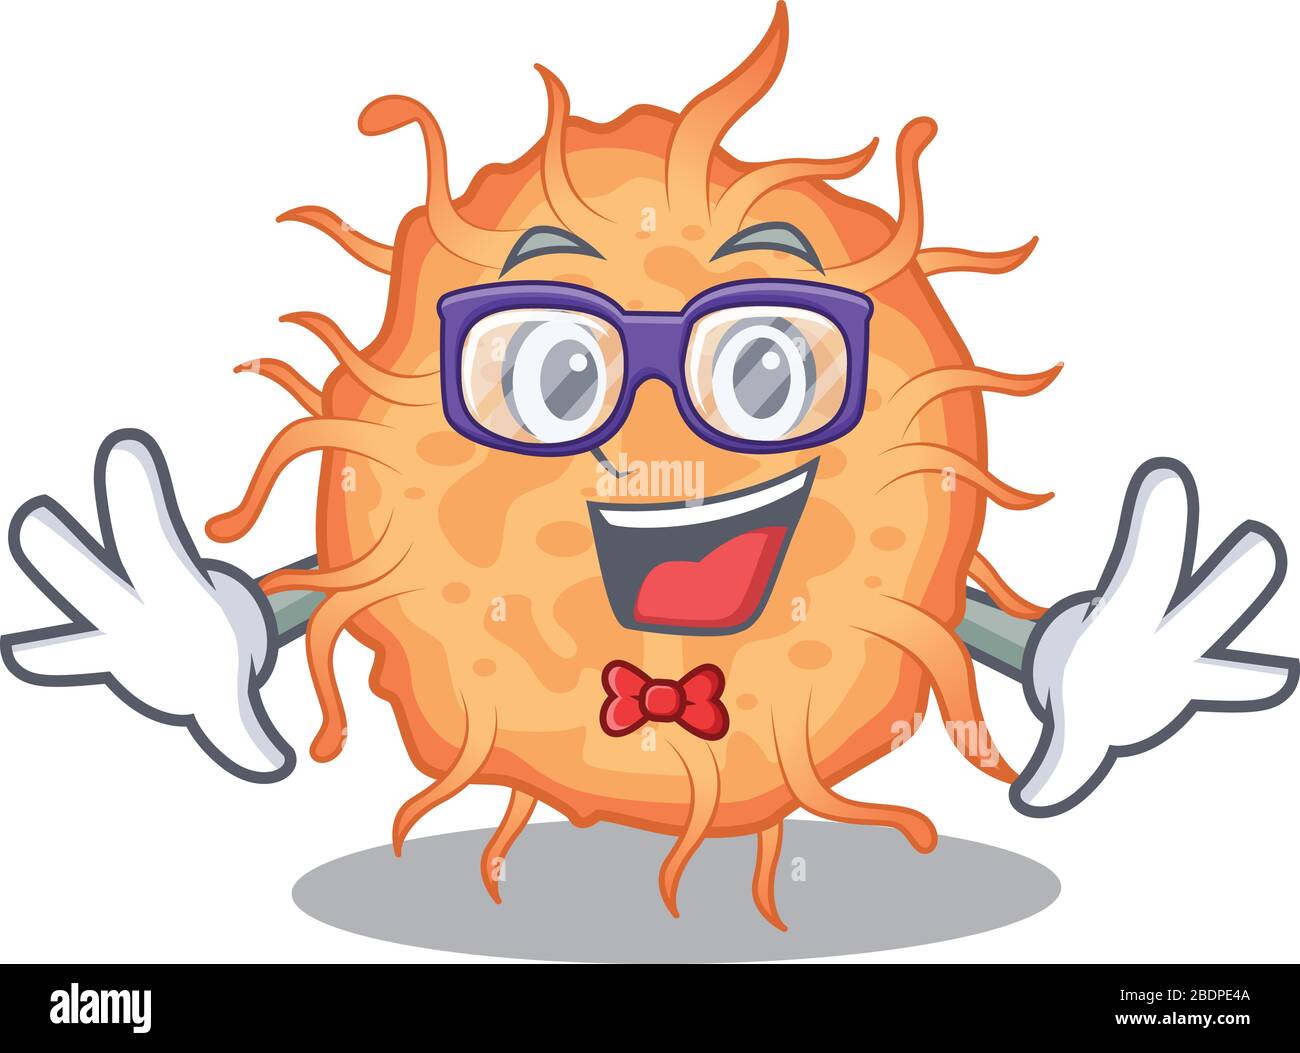 Mascot design style of geek bacteria endospore with glasses Stock Vector